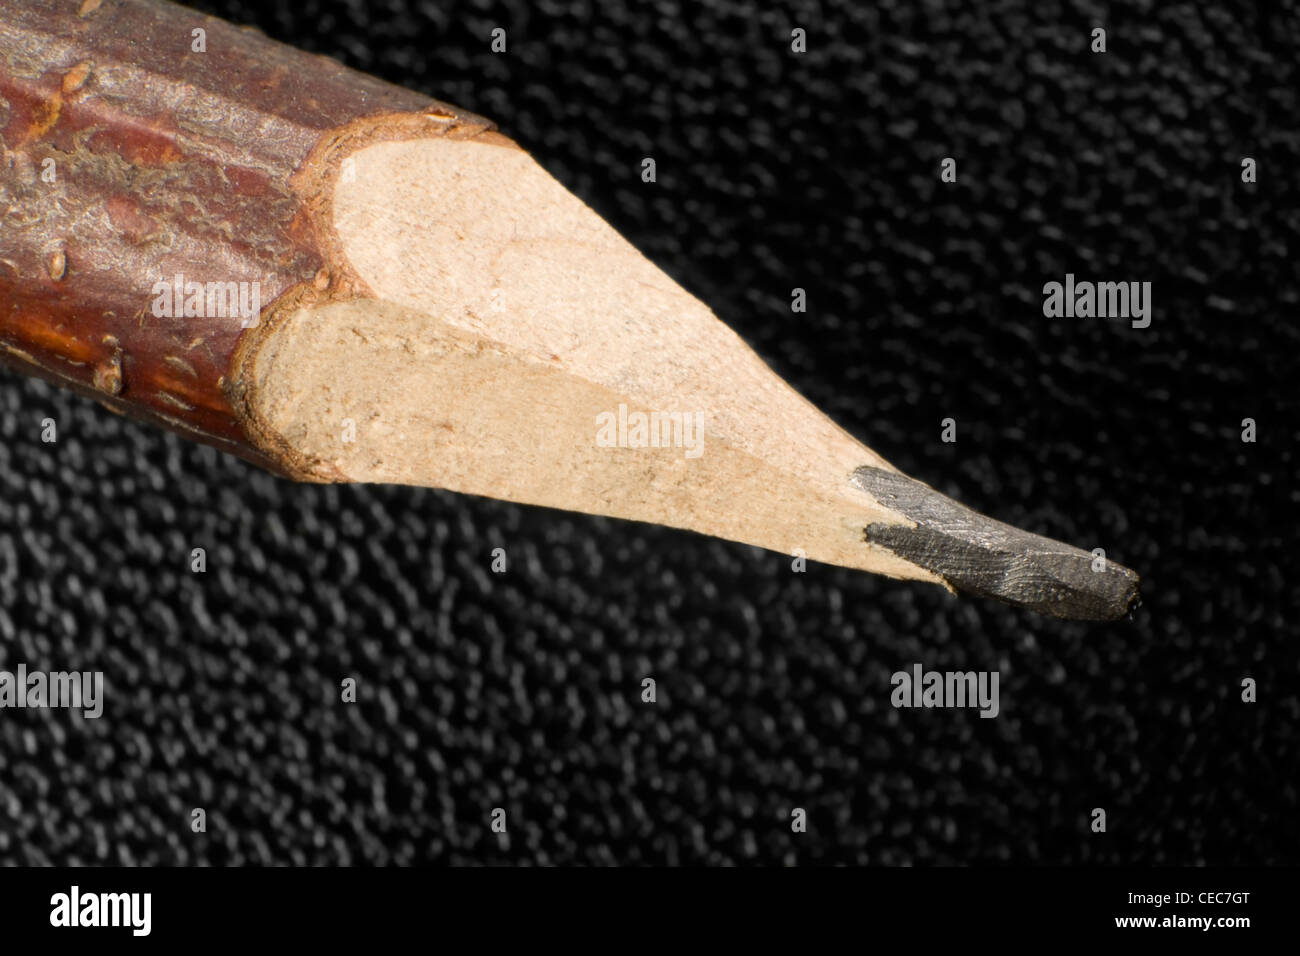 detail of a rural wooden pencil tip in front of a black leather surface Stock Photo